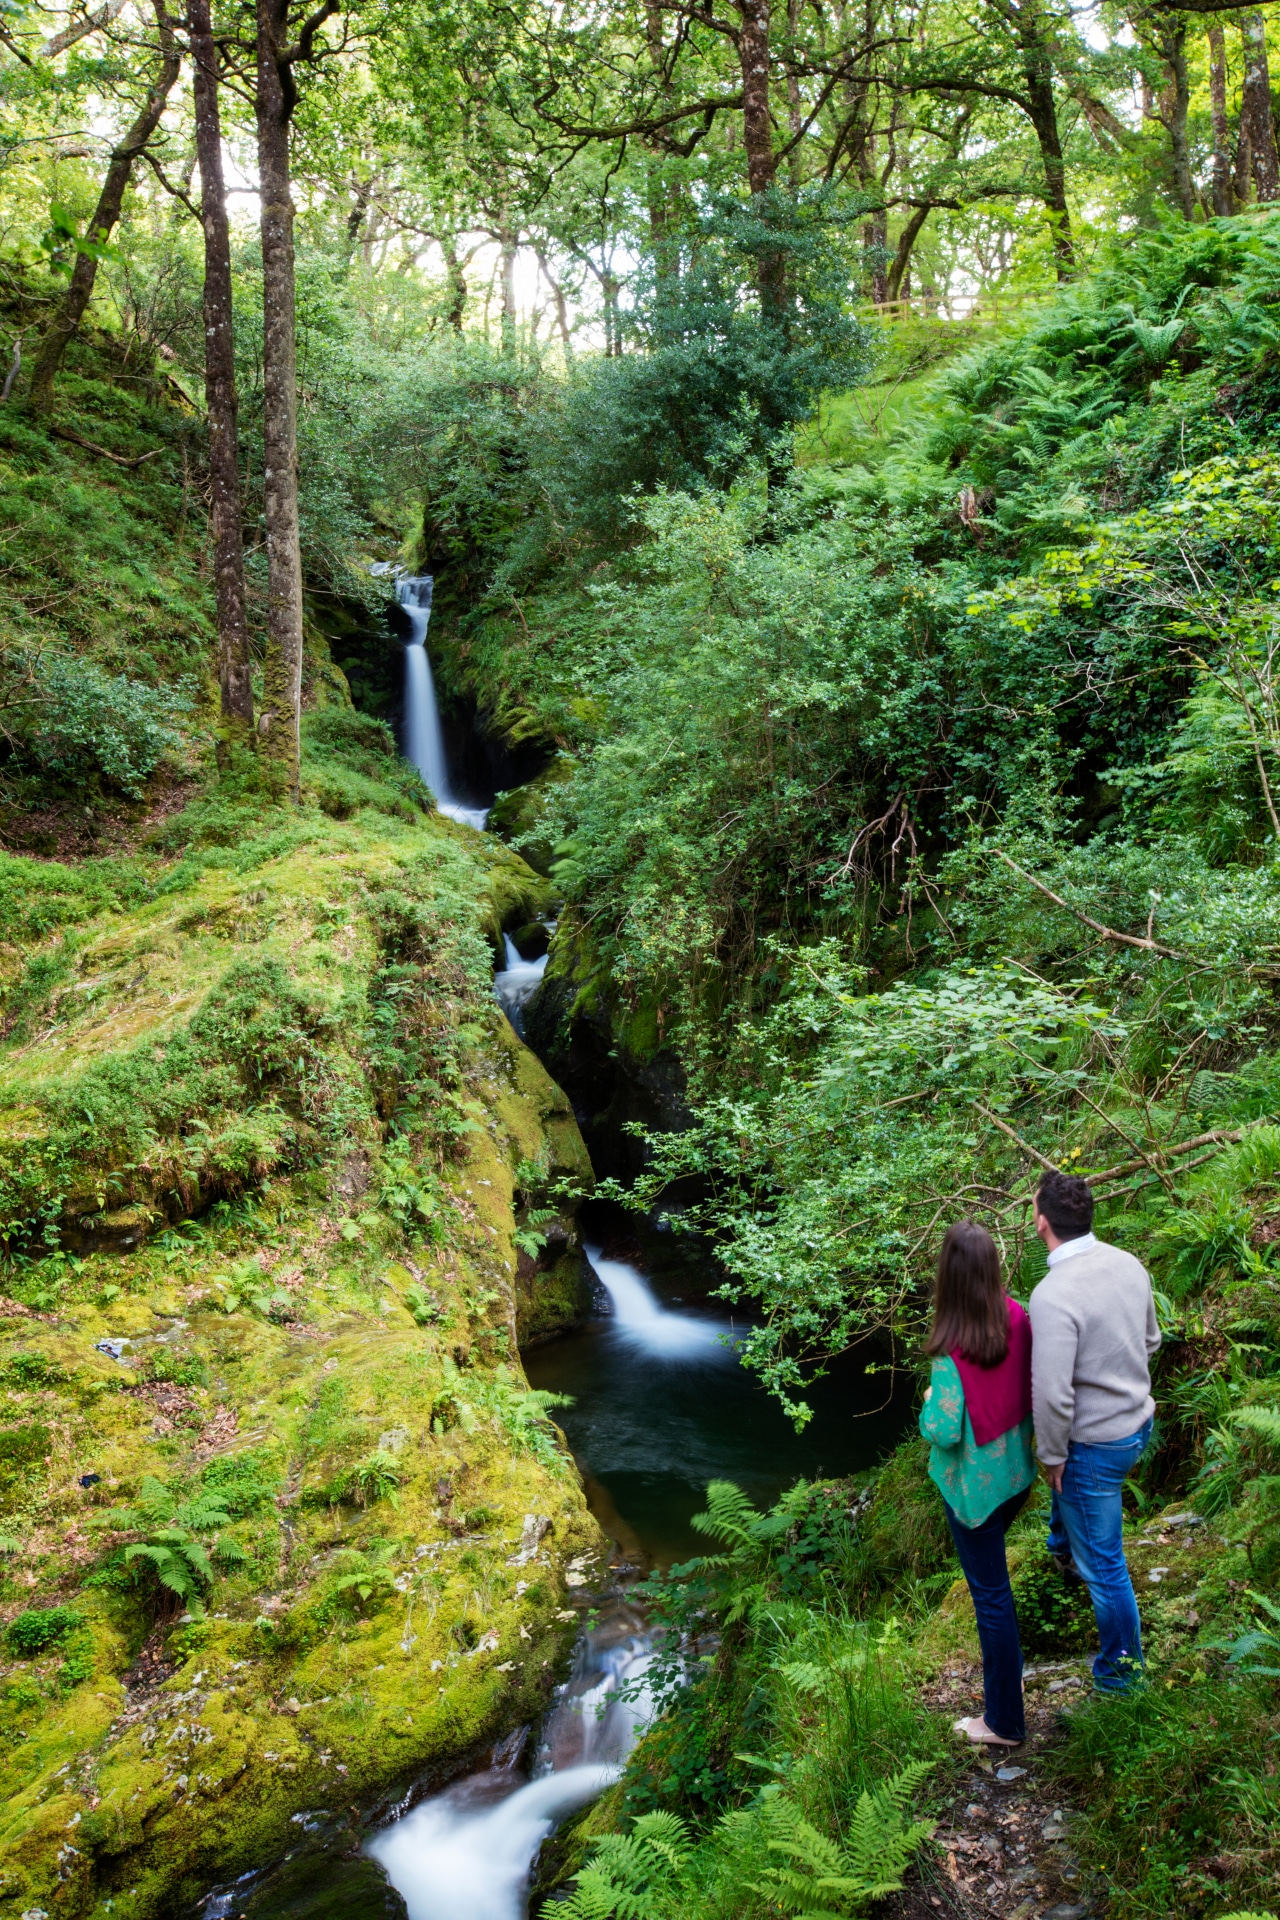 Couple looking at Waterfall in Glendalough